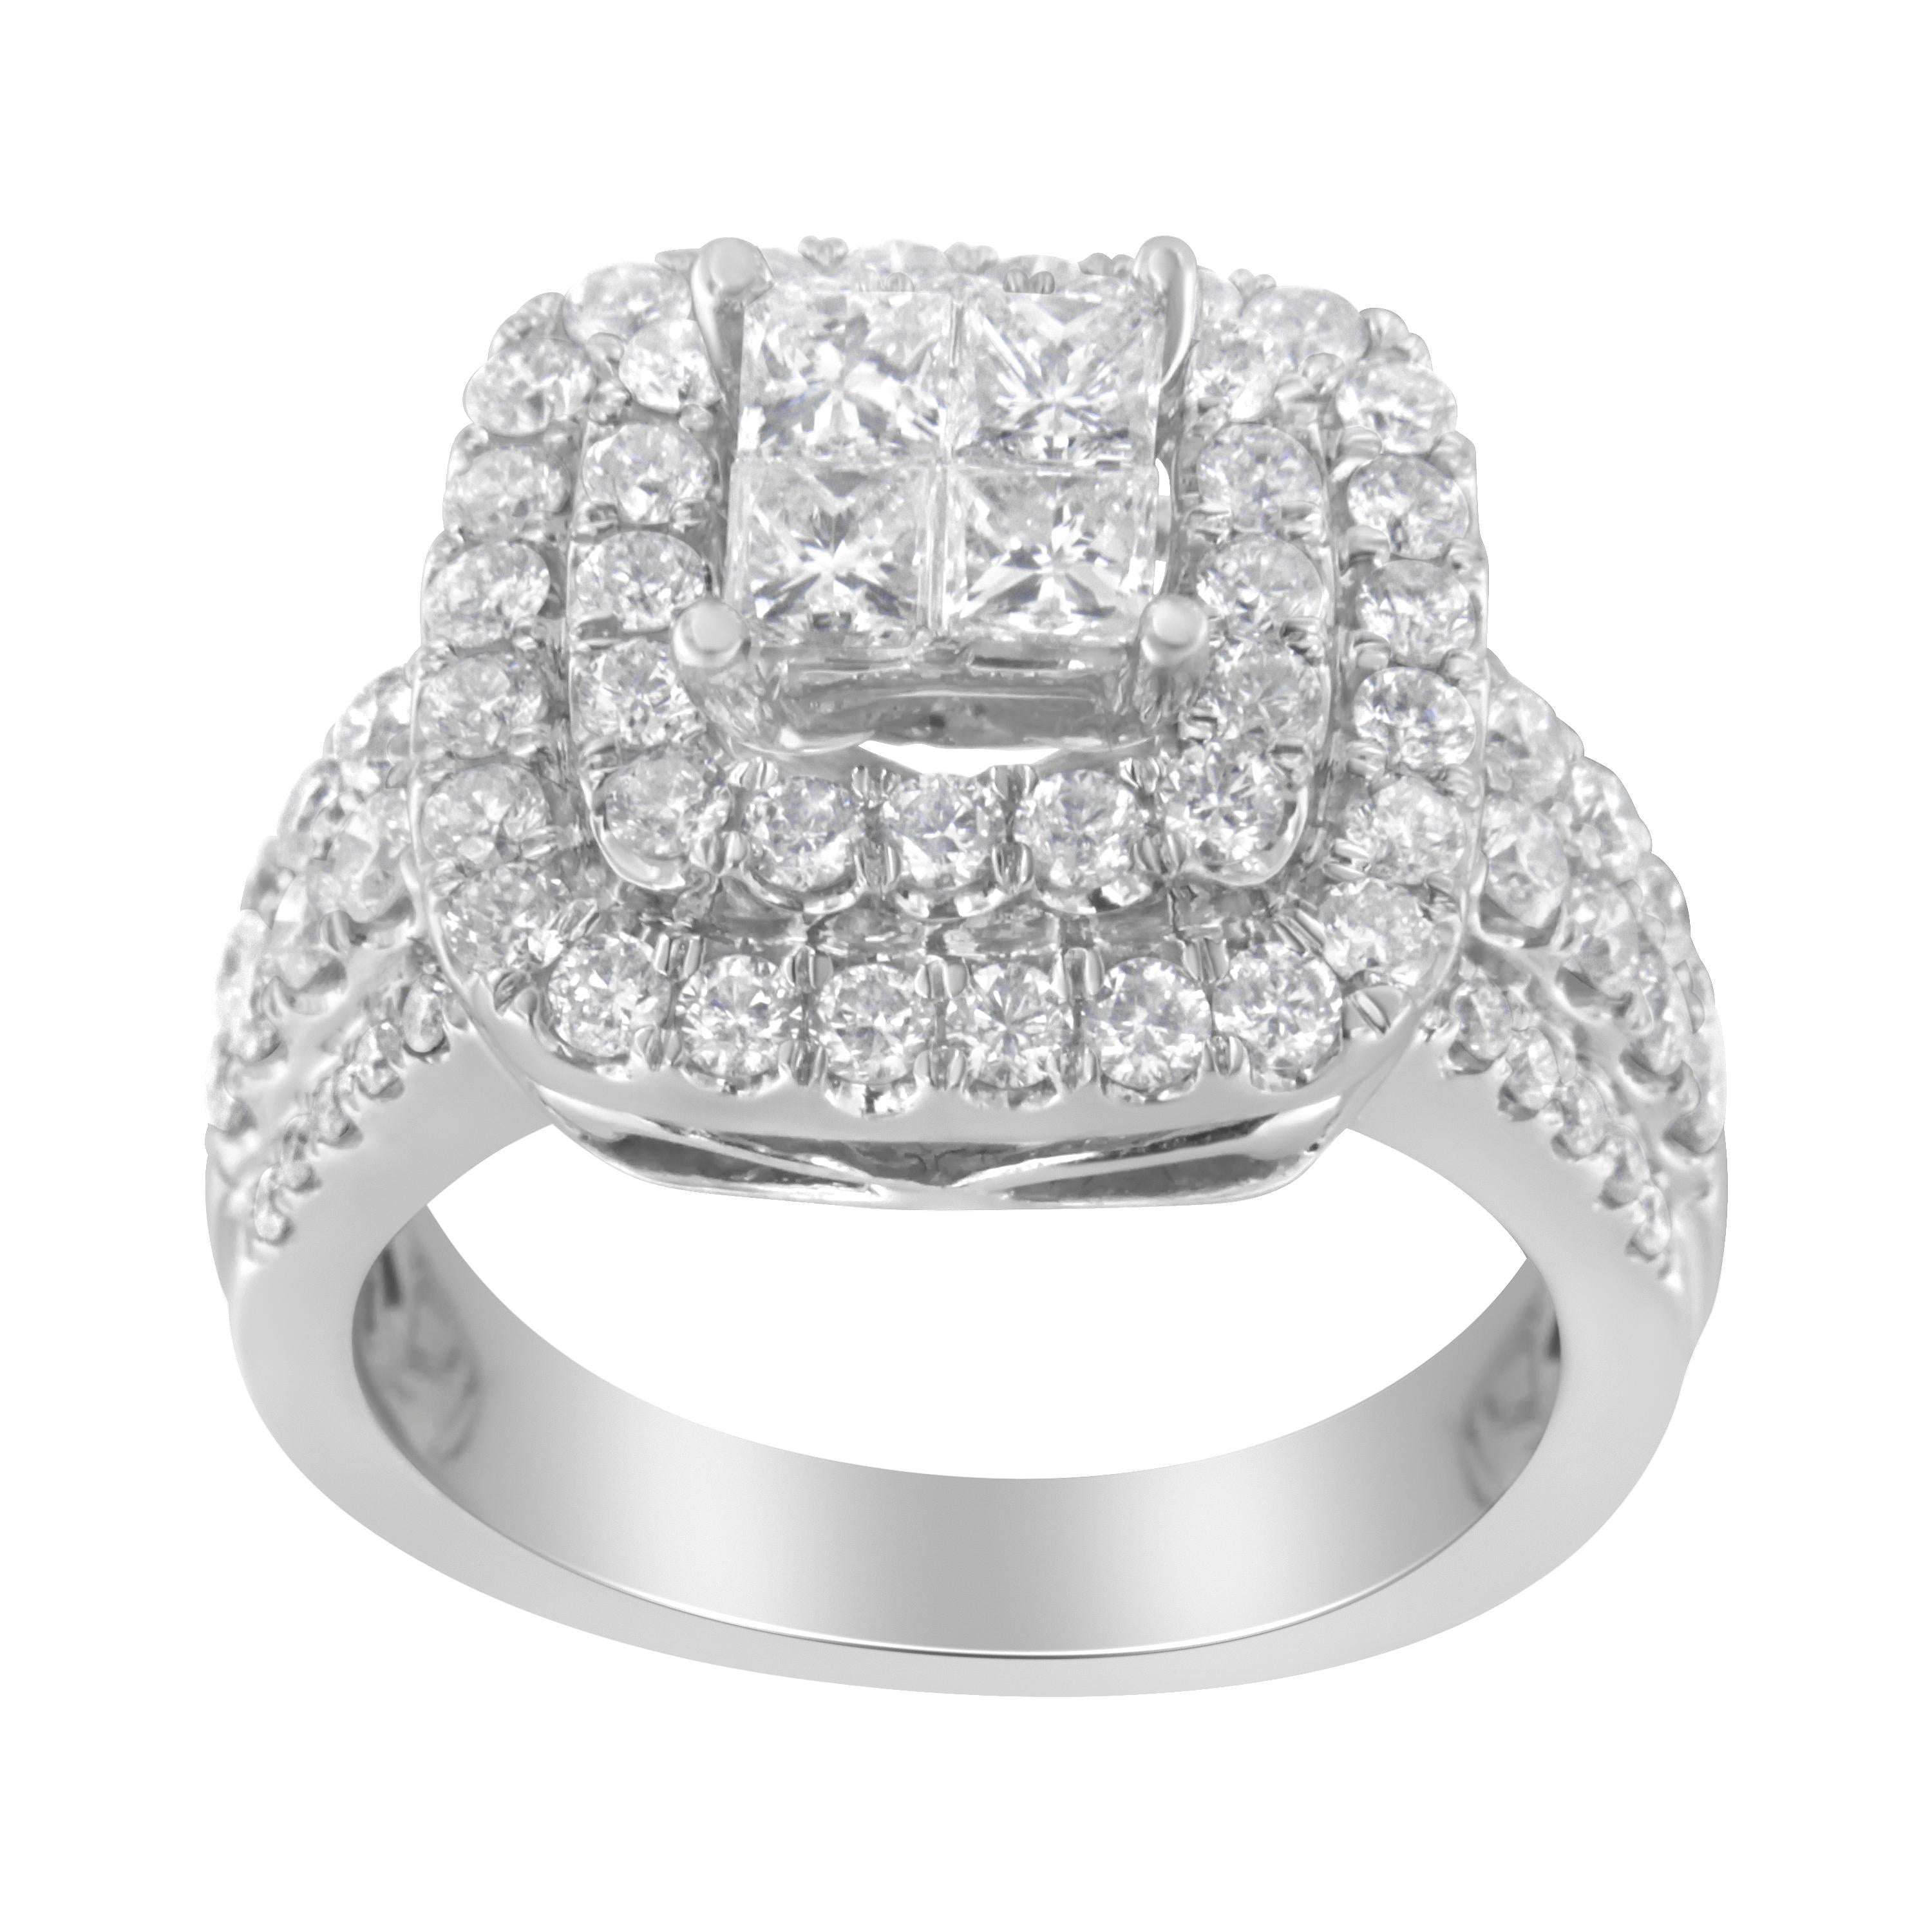 Contemporary 14K White Gold 2 ¼ Carat Round and Princess Diamond Ring For Sale